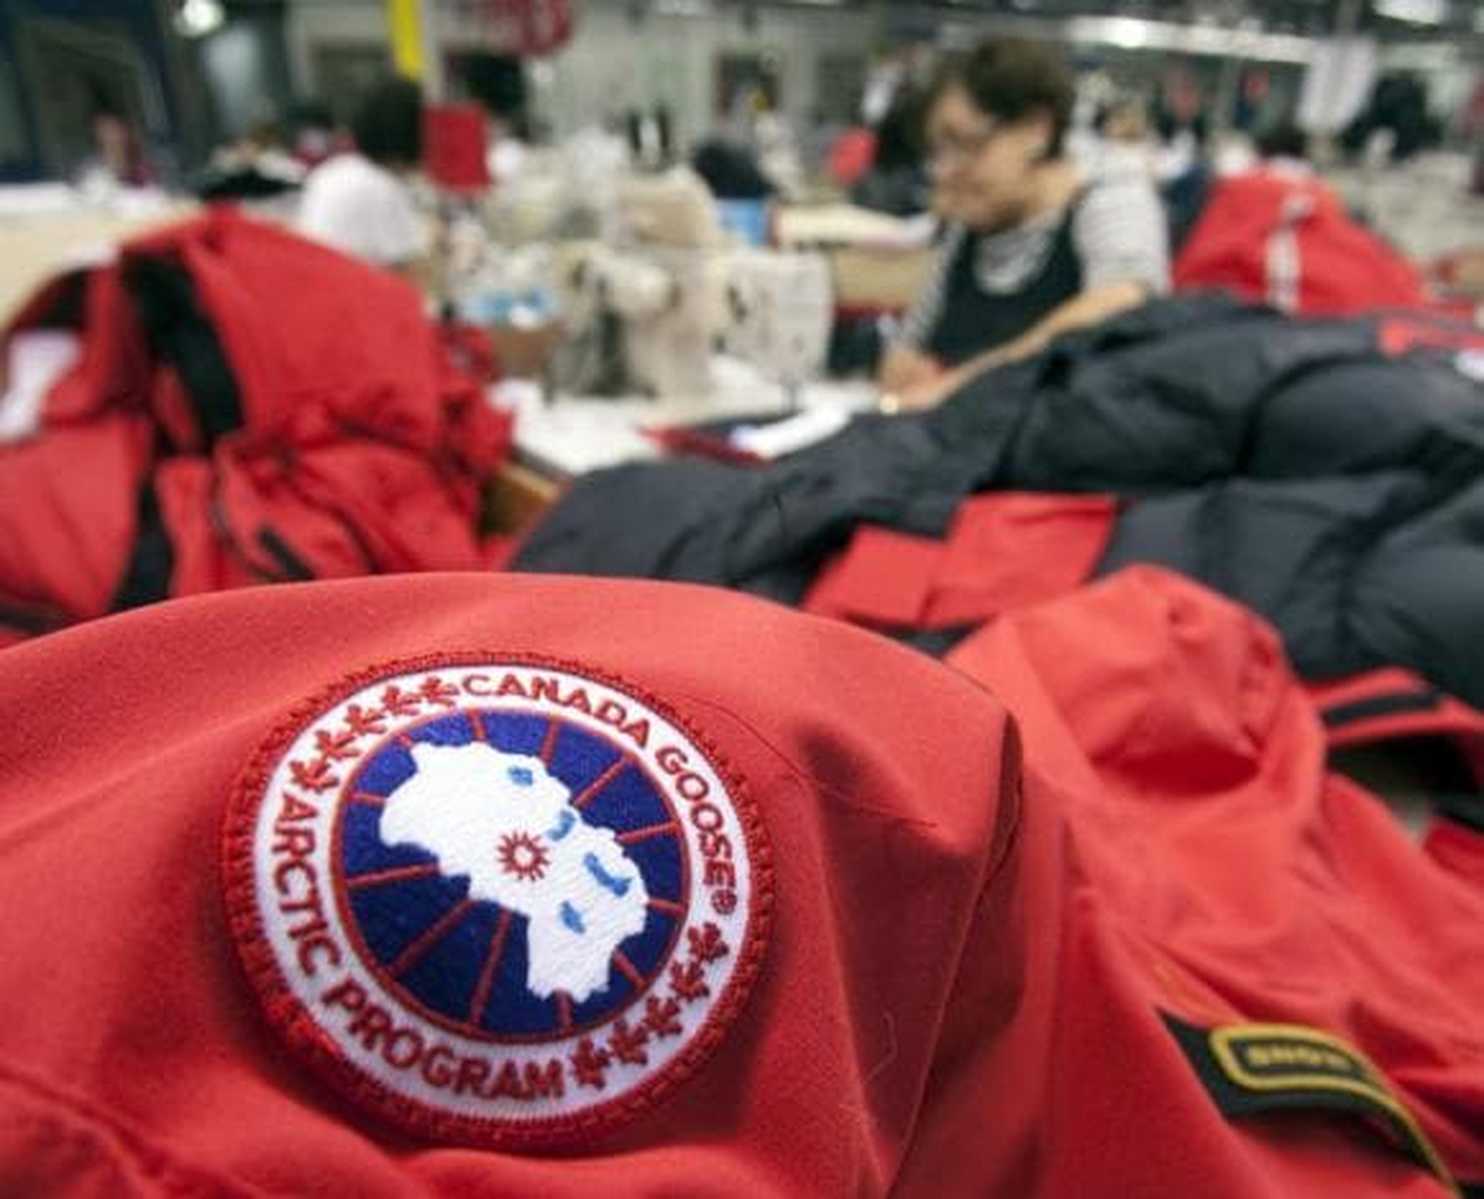 Canada Goose jackets replica authentic - The coolest thing at cold colleges: Warm $700-plus Canada Goose ...